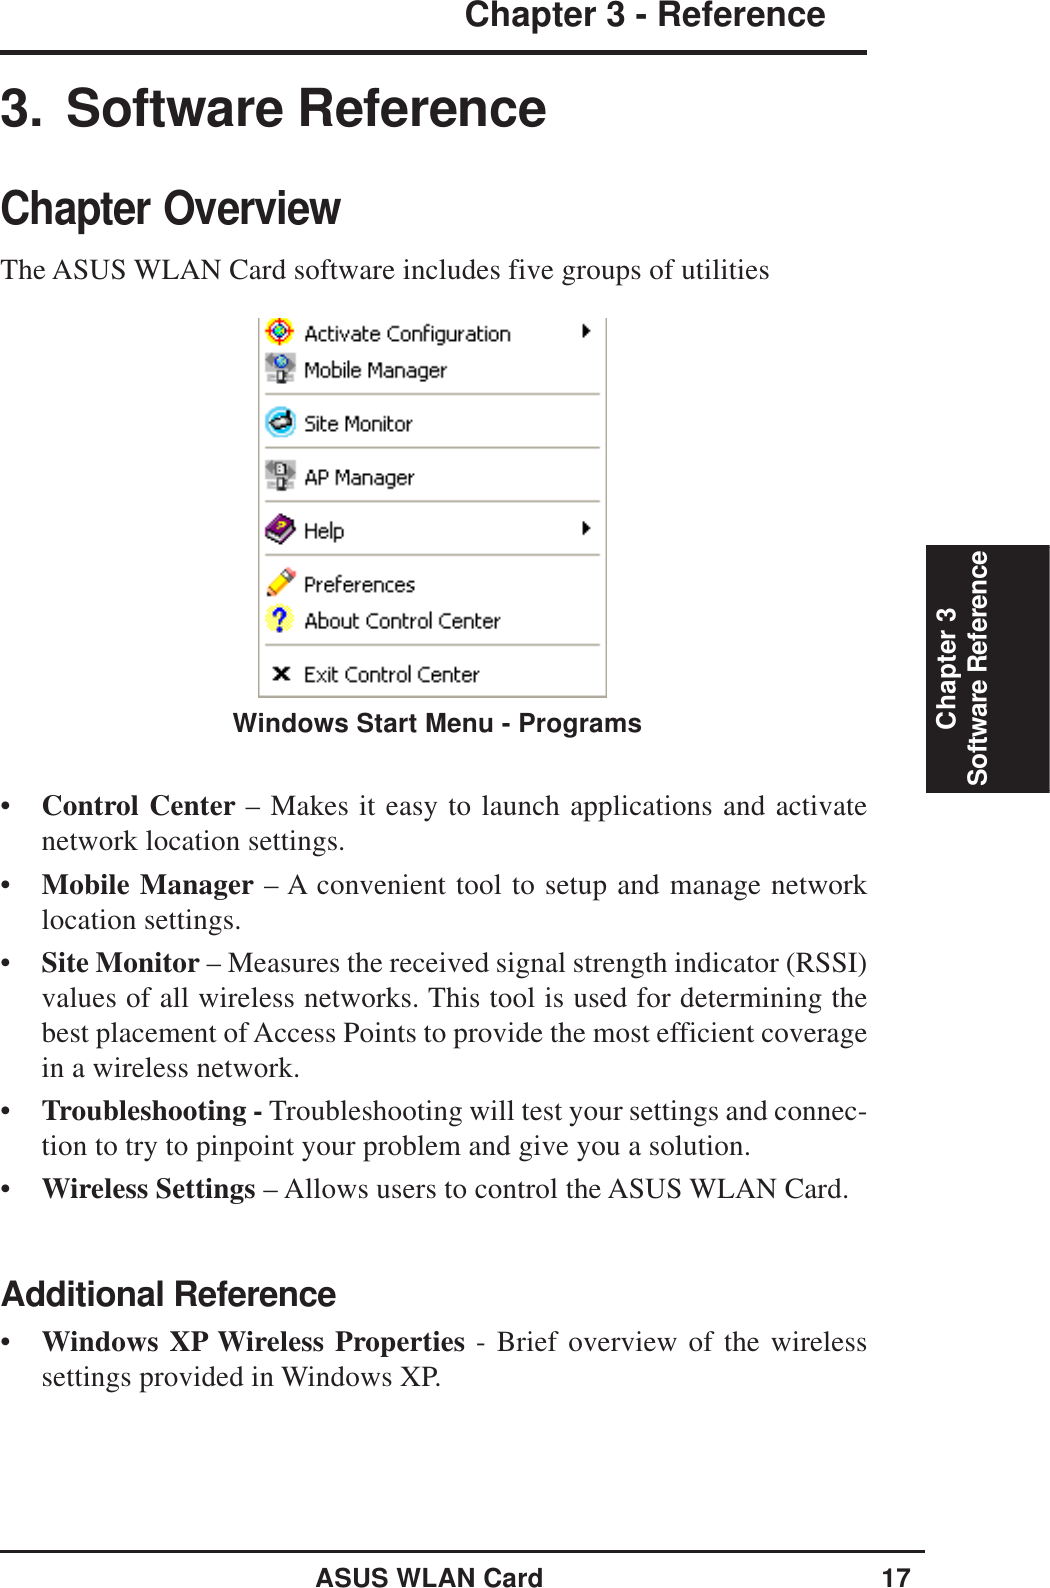 ASUS WLAN Card 17Chapter 3 - ReferenceChapter 3Software Reference•Control Center – Makes it easy to launch applications and activatenetwork location settings.•Mobile Manager – A convenient tool to setup and manage networklocation settings.•Site Monitor – Measures the received signal strength indicator (RSSI)values of all wireless networks. This tool is used for determining thebest placement of Access Points to provide the most efficient coveragein a wireless network.•Troubleshooting - Troubleshooting will test your settings and connec-tion to try to pinpoint your problem and give you a solution.•Wireless Settings – Allows users to control the ASUS WLAN Card.Additional Reference•Windows XP Wireless Properties - Brief overview of the wirelesssettings provided in Windows XP.3. Software ReferenceChapter OverviewThe ASUS WLAN Card software includes five groups of utilitiesWindows Start Menu - Programs